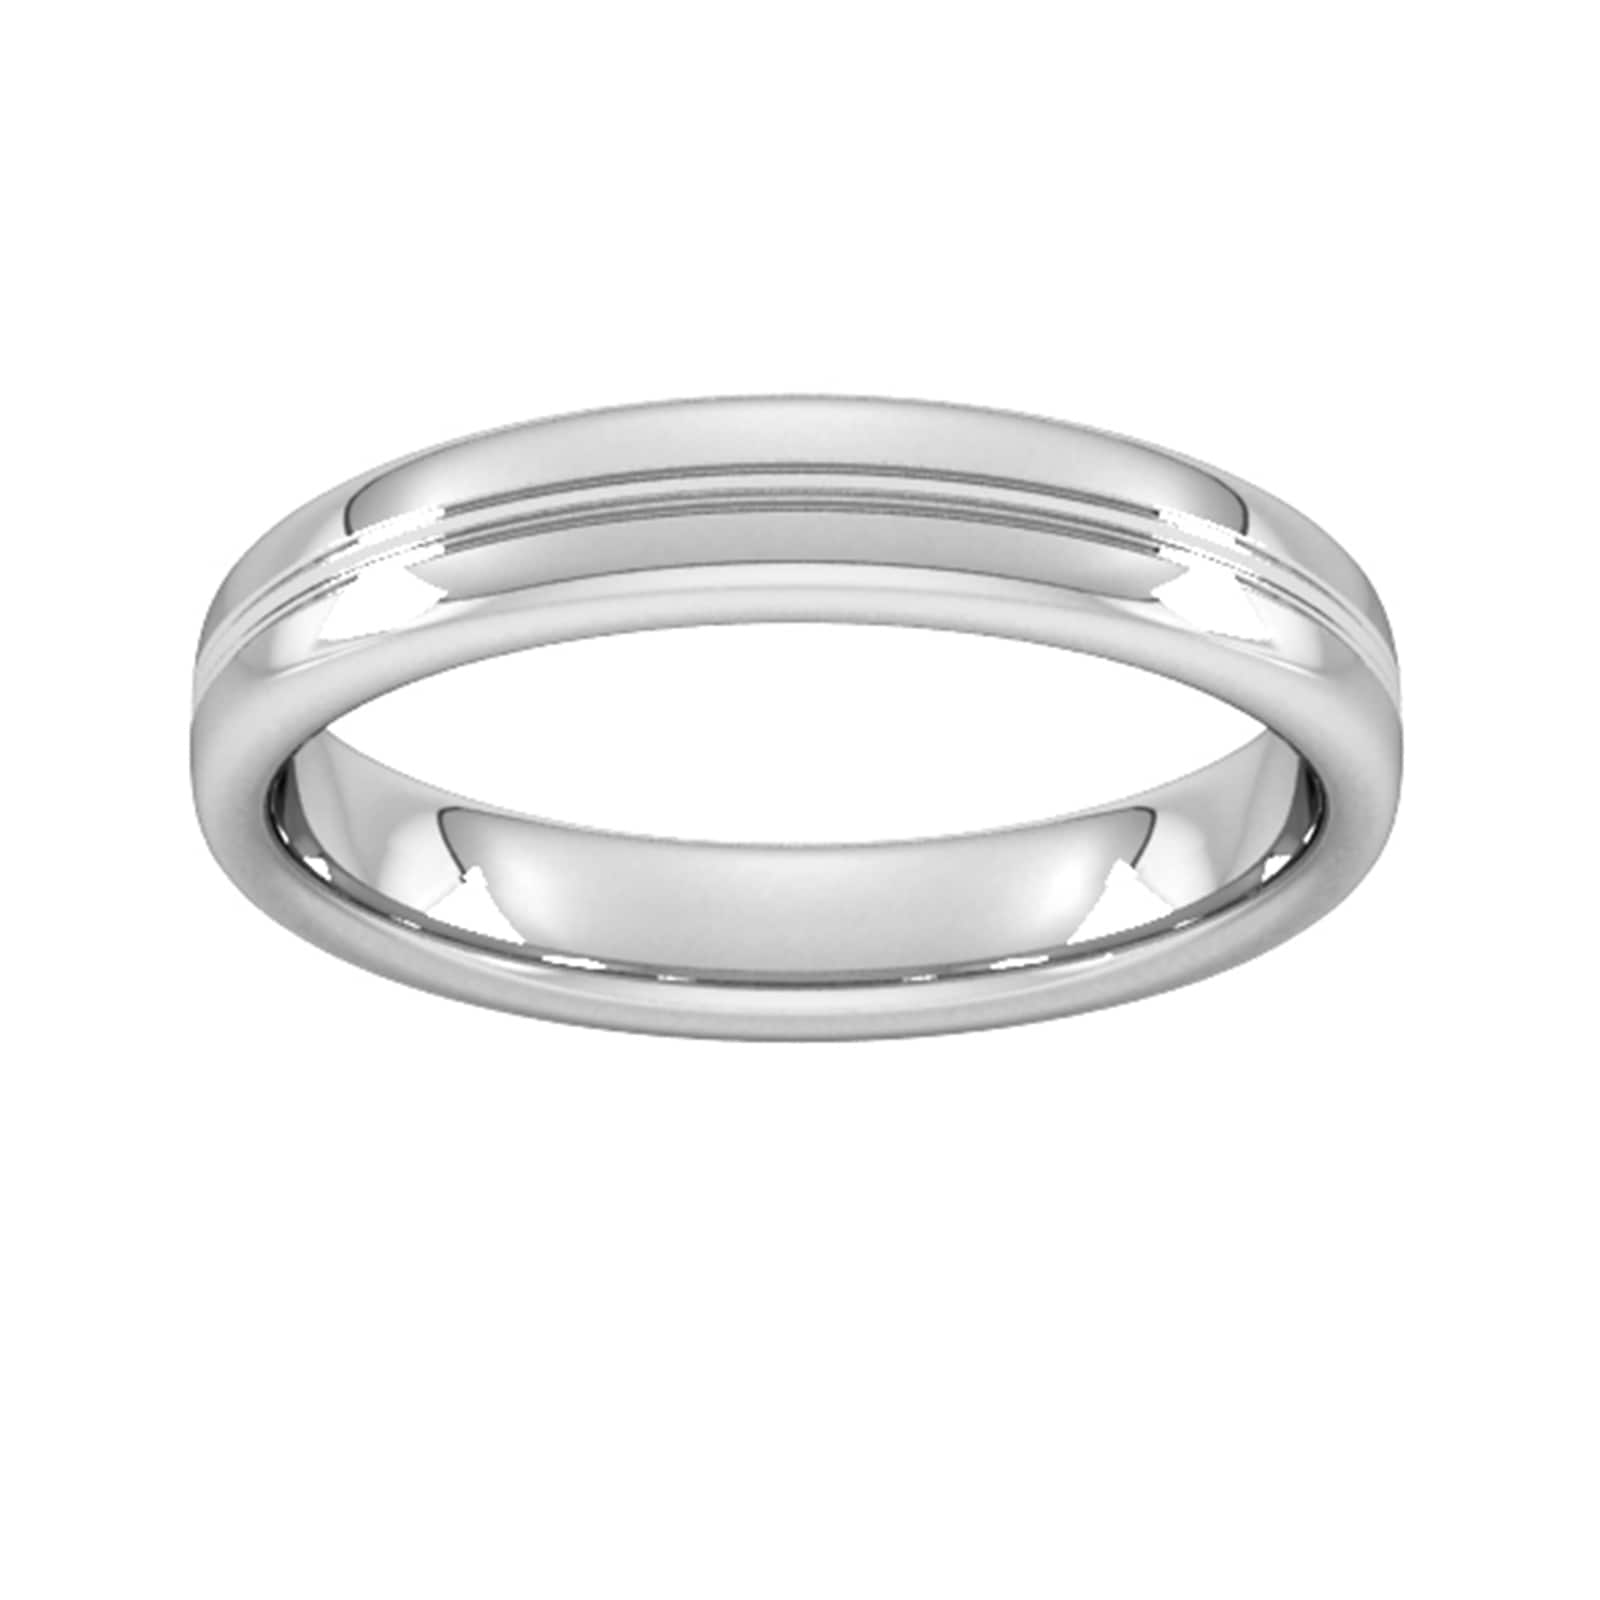 4mm Slight Court Standard Grooved Polished Finish Wedding Ring In 18 Carat White Gold - Ring Size K